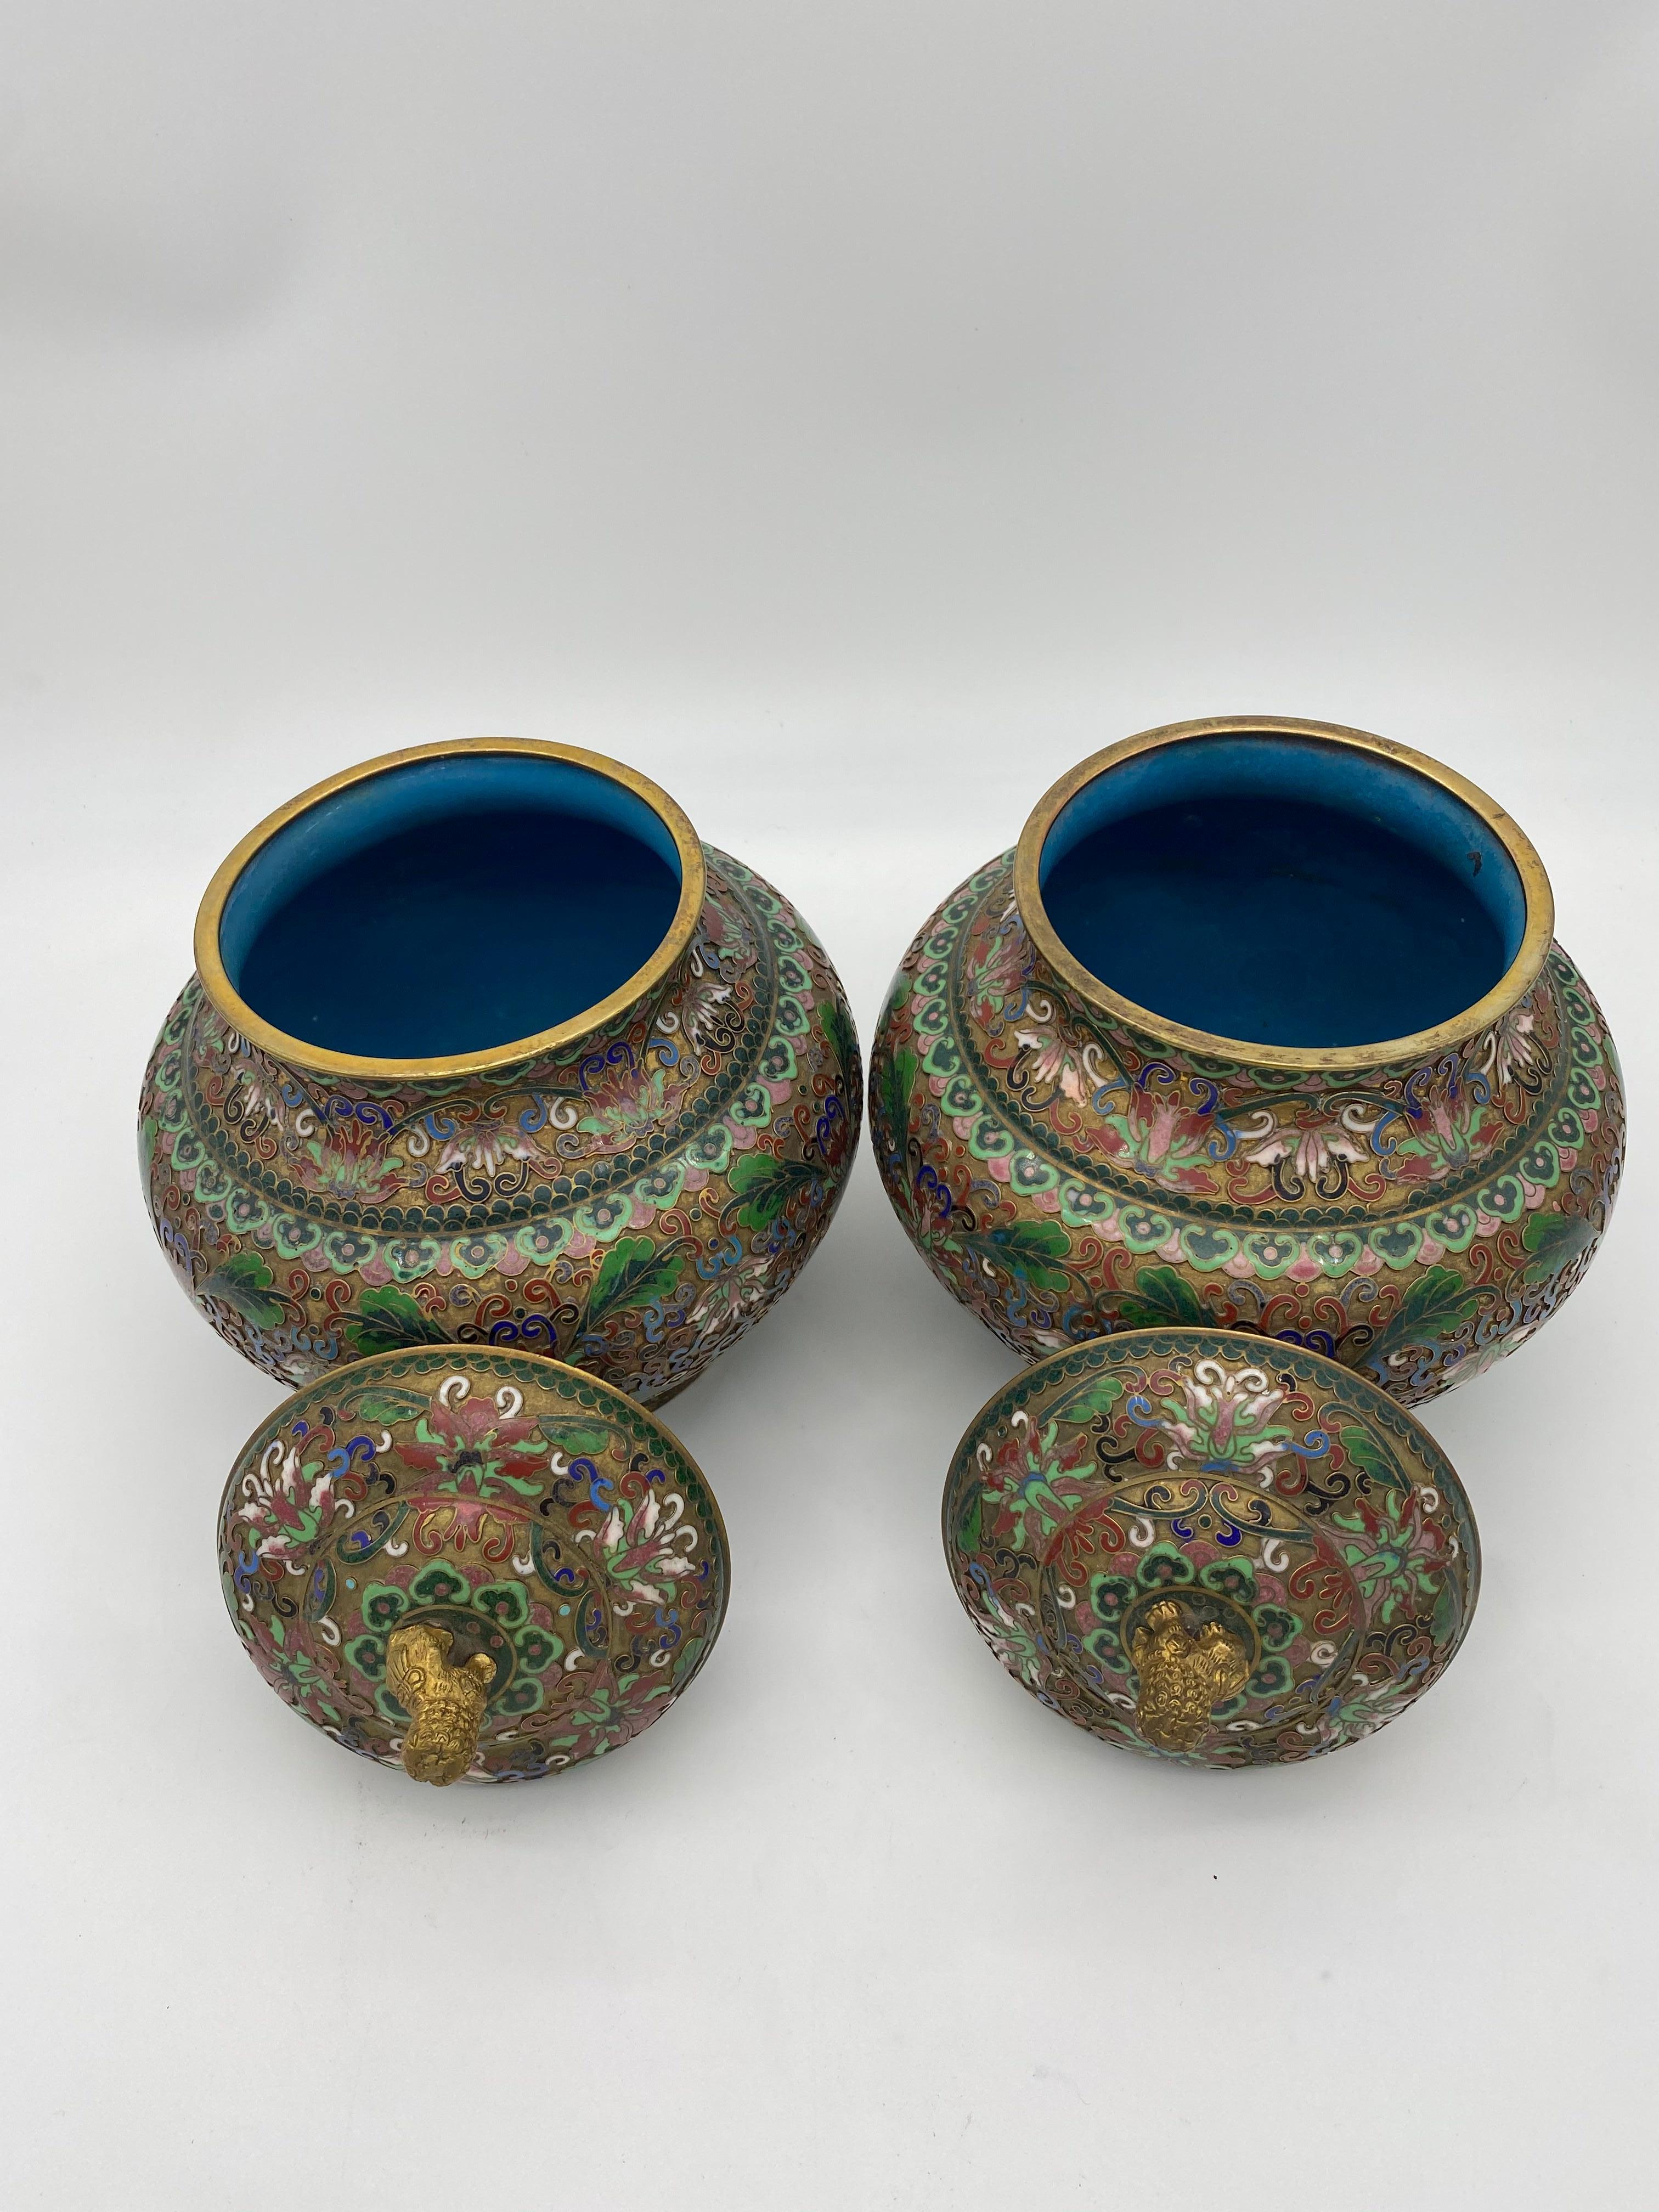 Chinese Export Pair of Chinese Cloisonné Enamel Lidded Open Work Ginger Jars